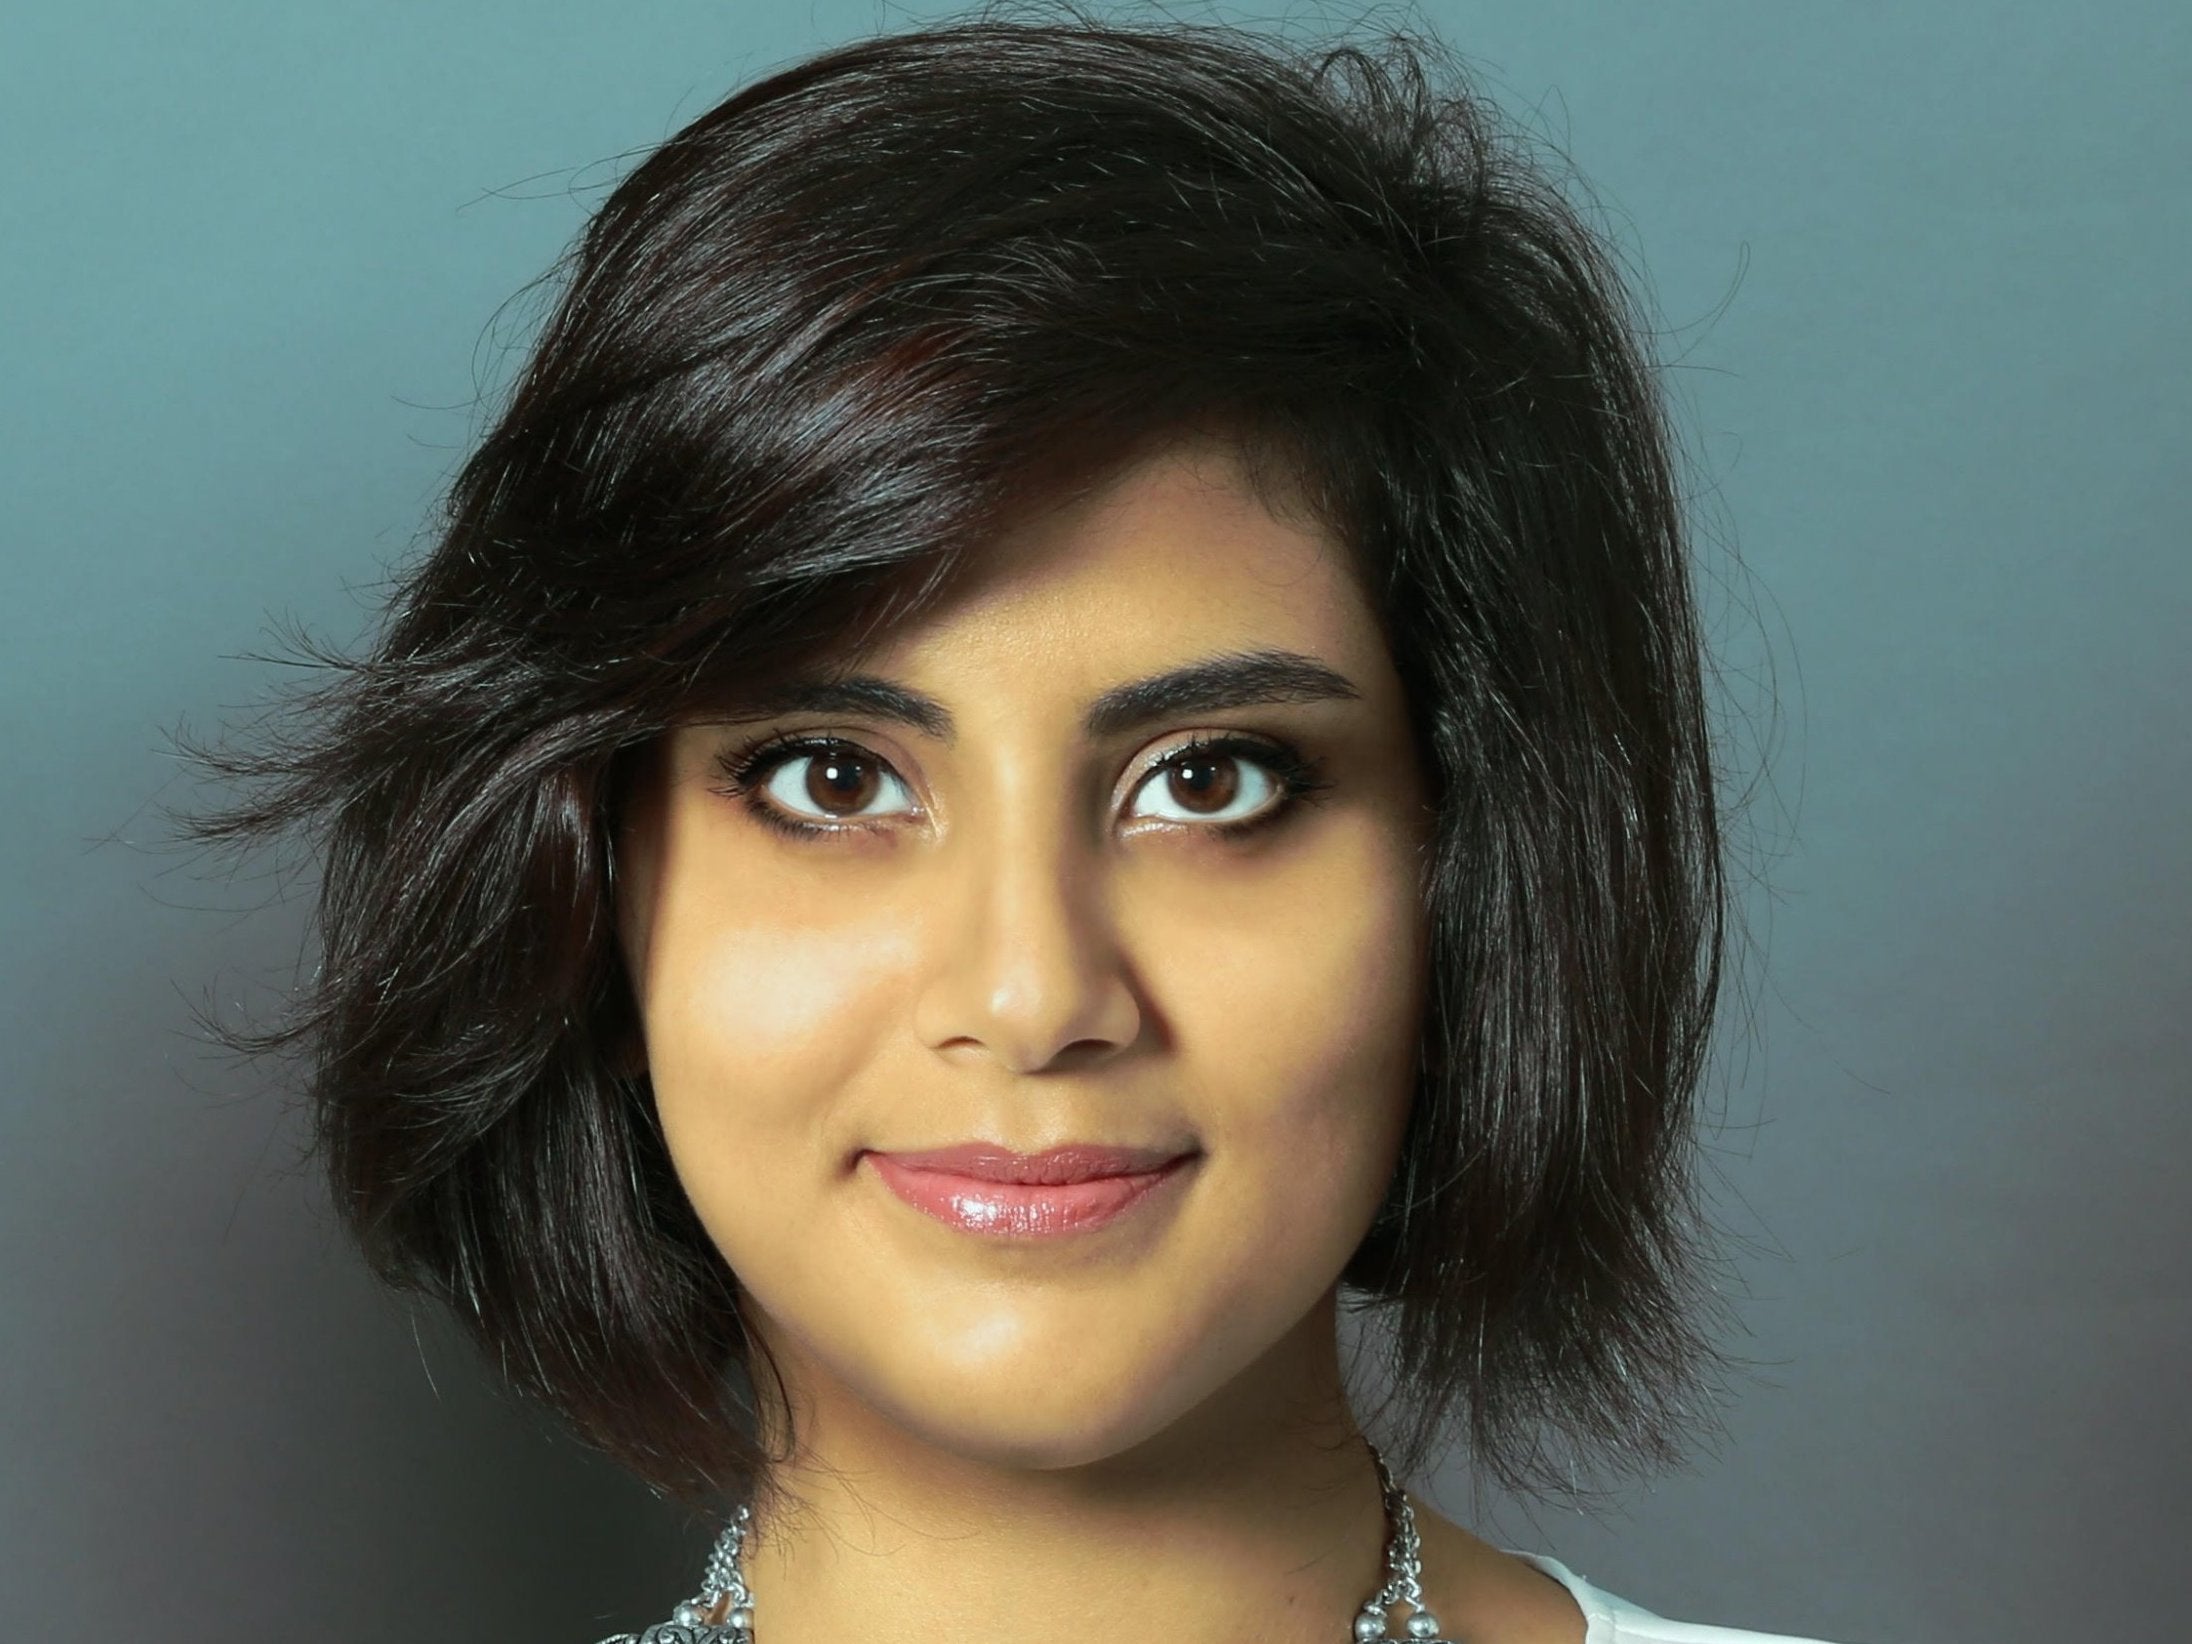 Loujain al-Hathloul peacefully campaigned alongside other activists for years to allow women the right to drive